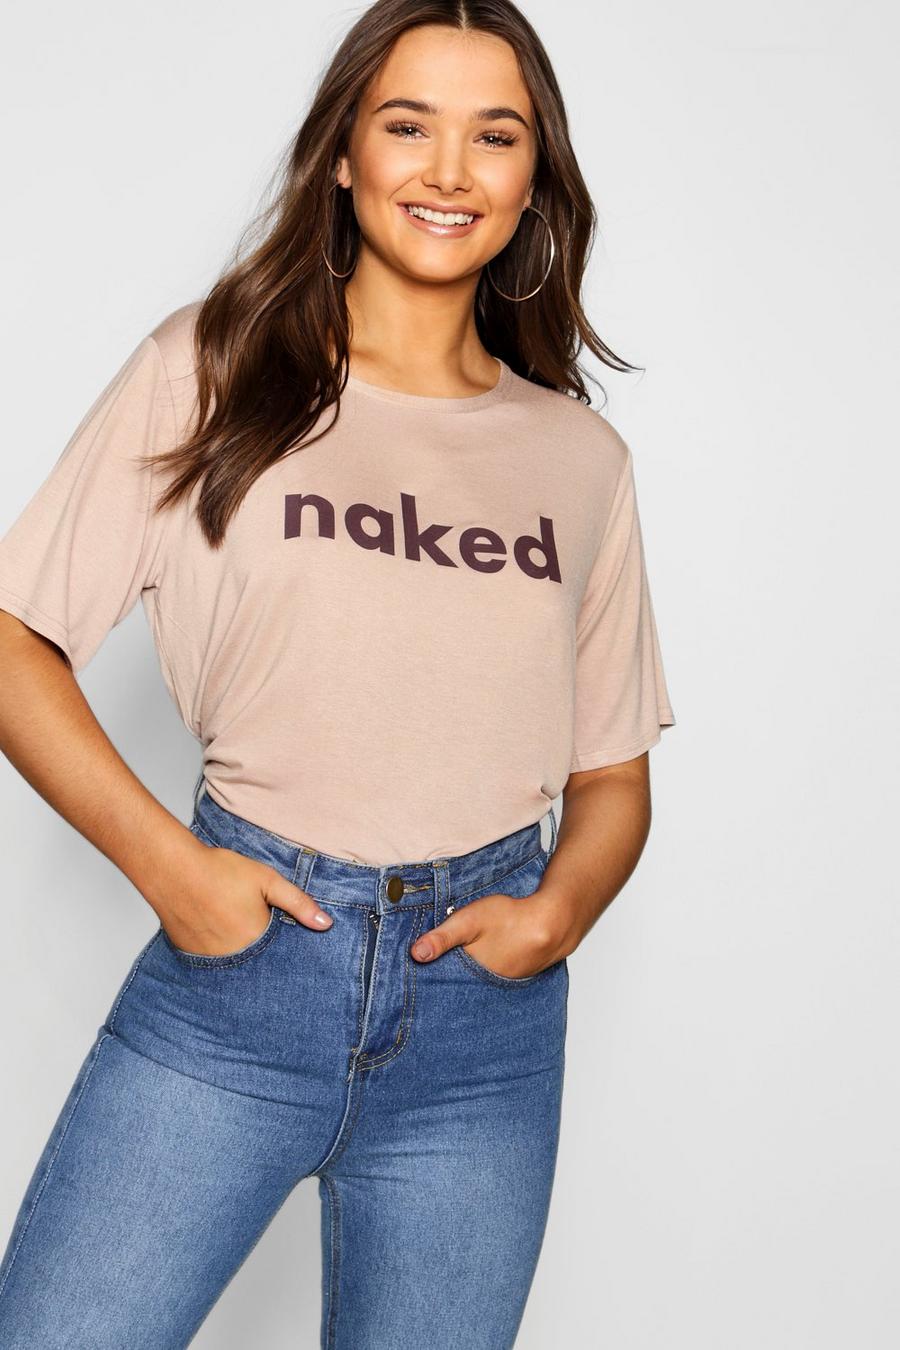 Naked Graphic T-Shirt image number 1